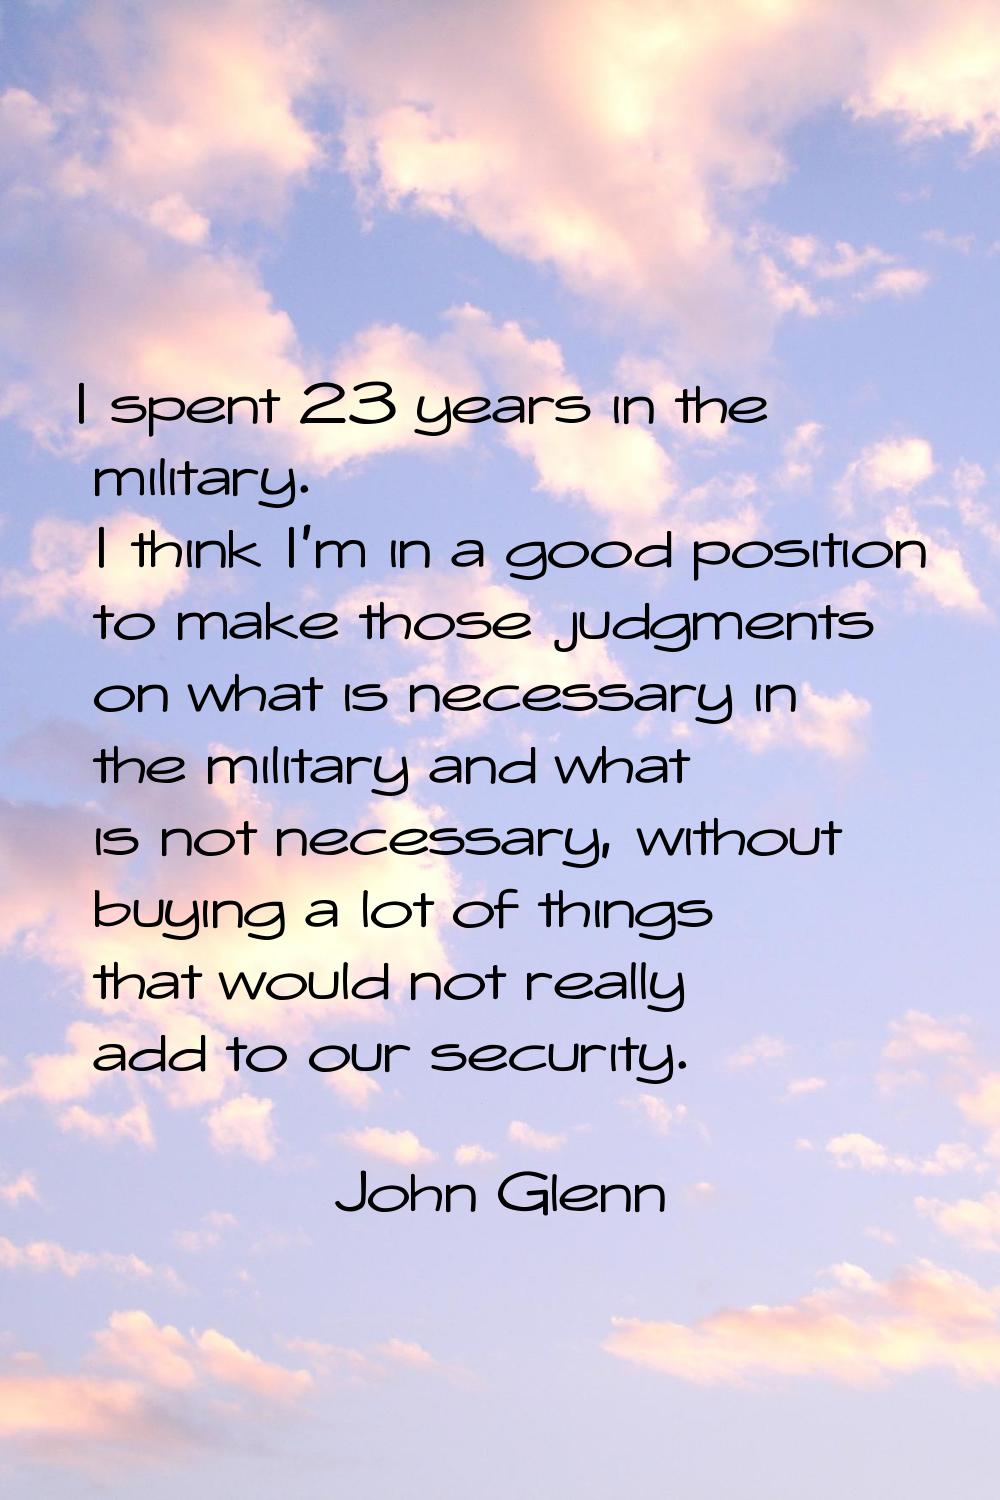 I spent 23 years in the military. I think I'm in a good position to make those judgments on what is